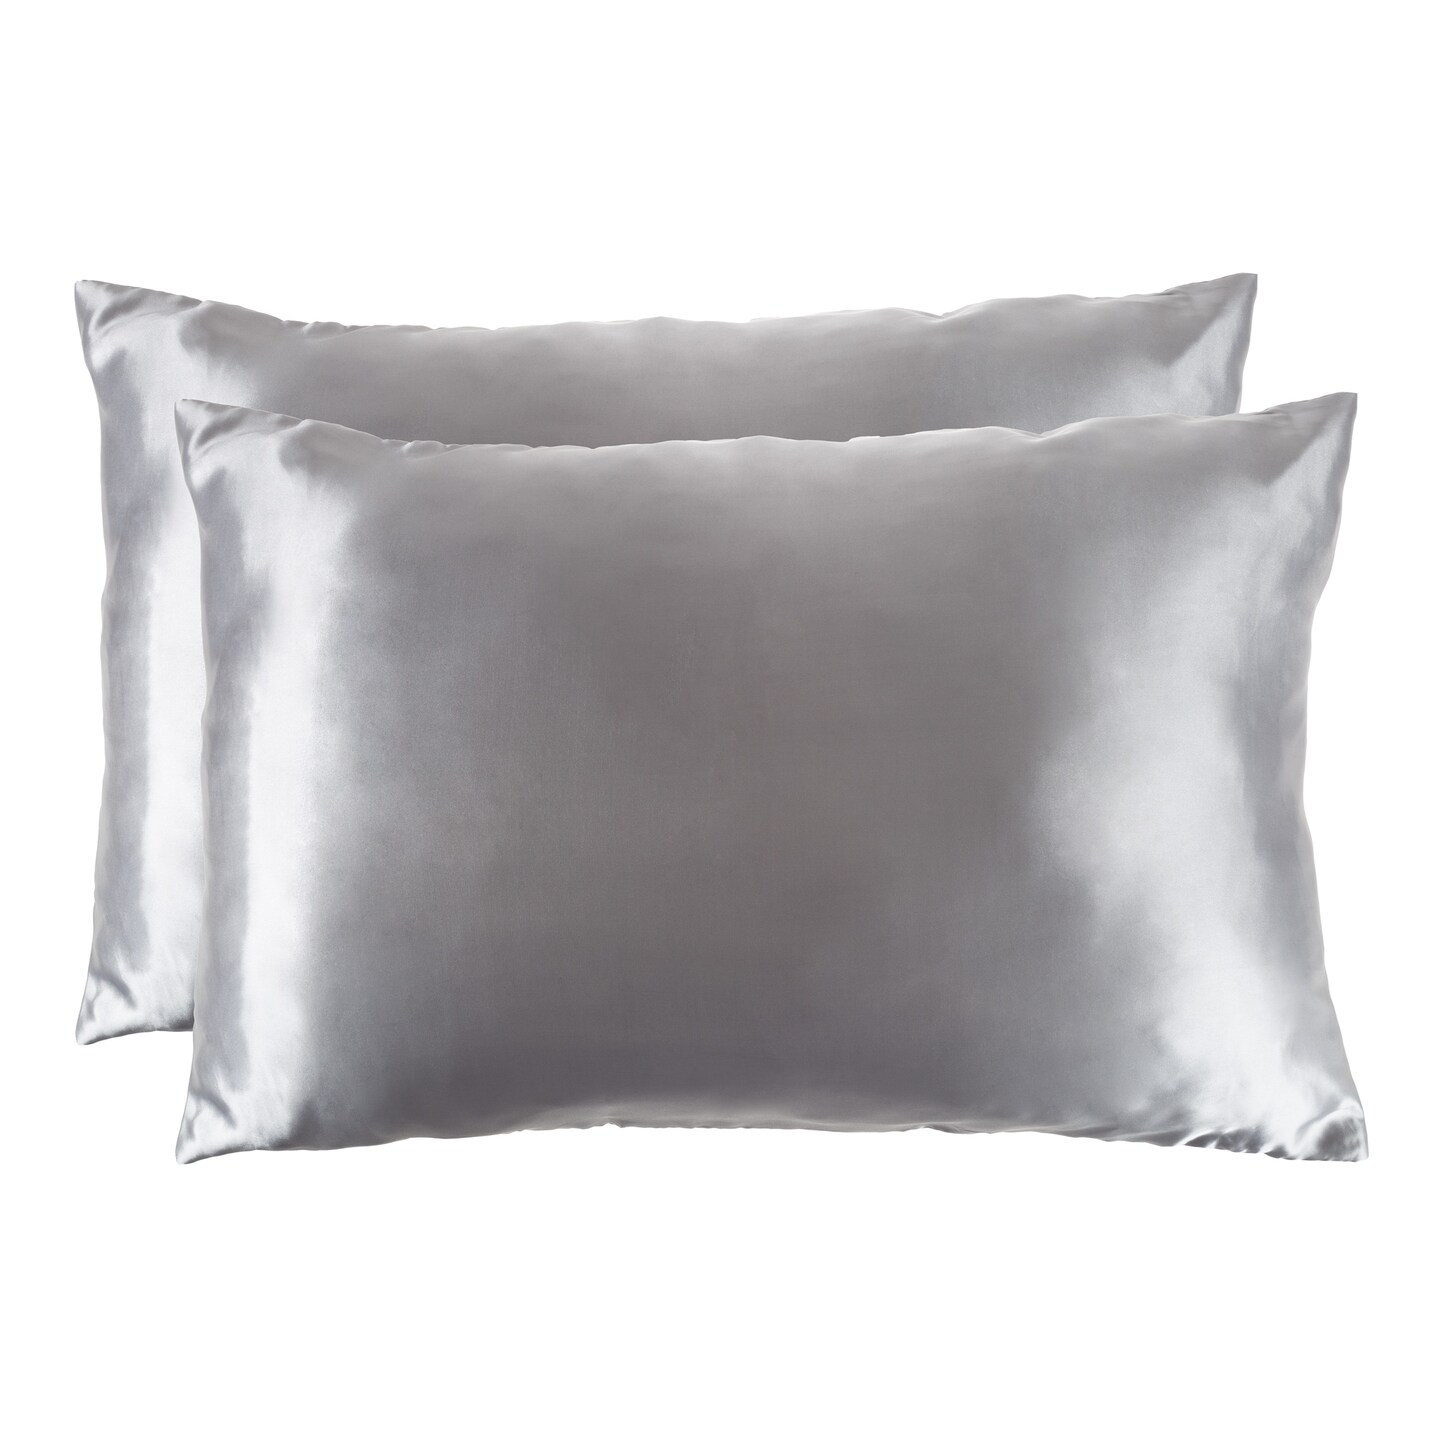 Lavish Home Set of 2 Soft and Silky Satin Microfiber Pillowcases Hair and Skin Pillow Covers Hidden Zippers